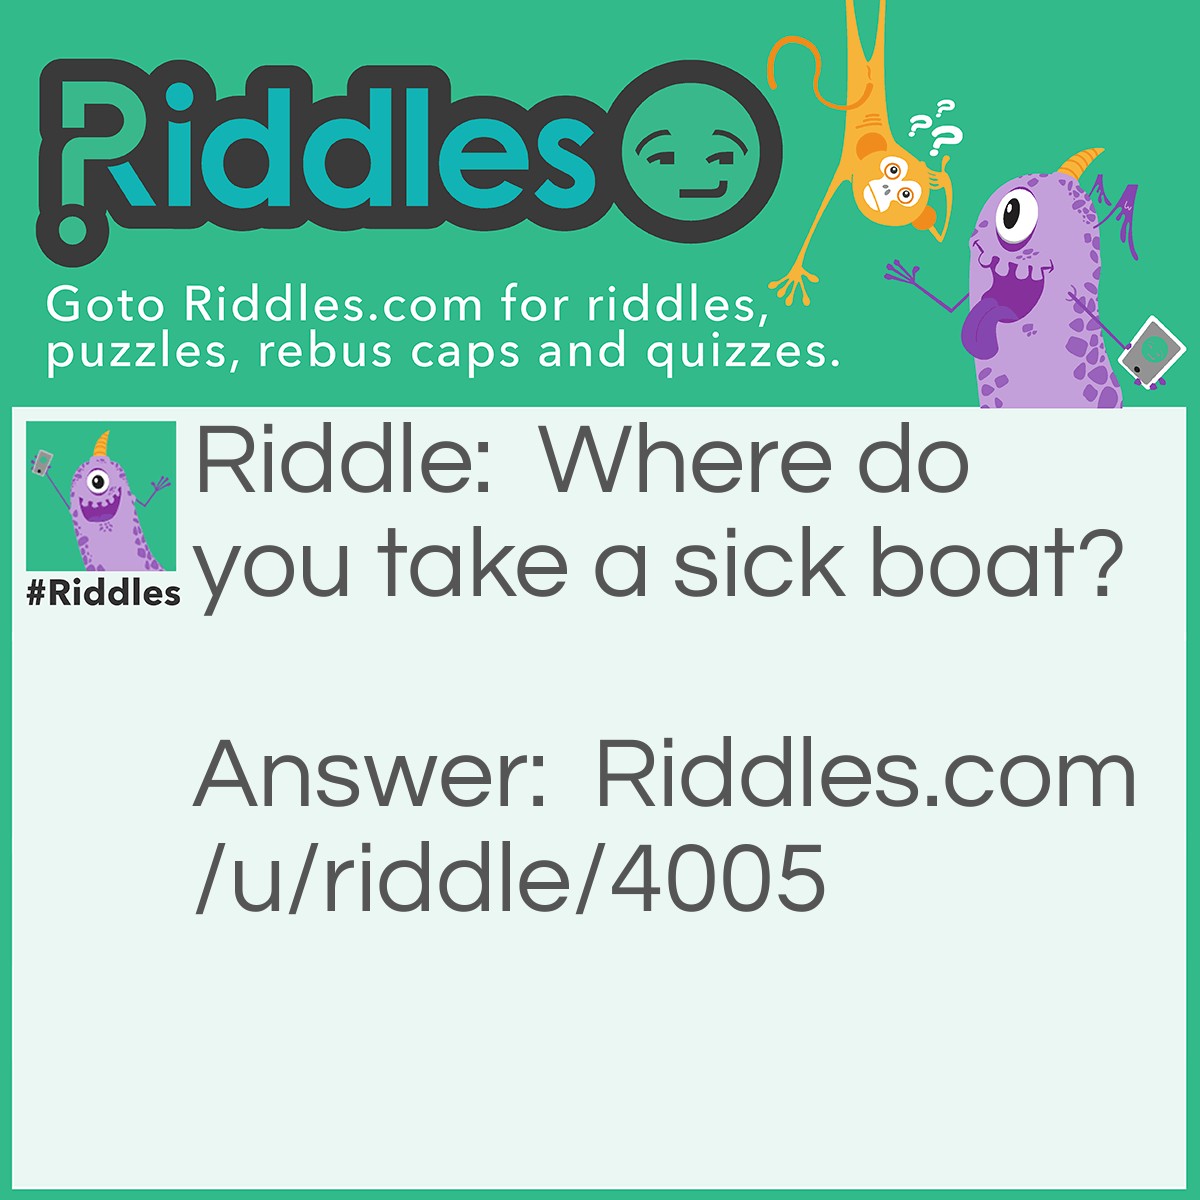 Riddle: Where do you take a sick boat? Answer: To the dock!